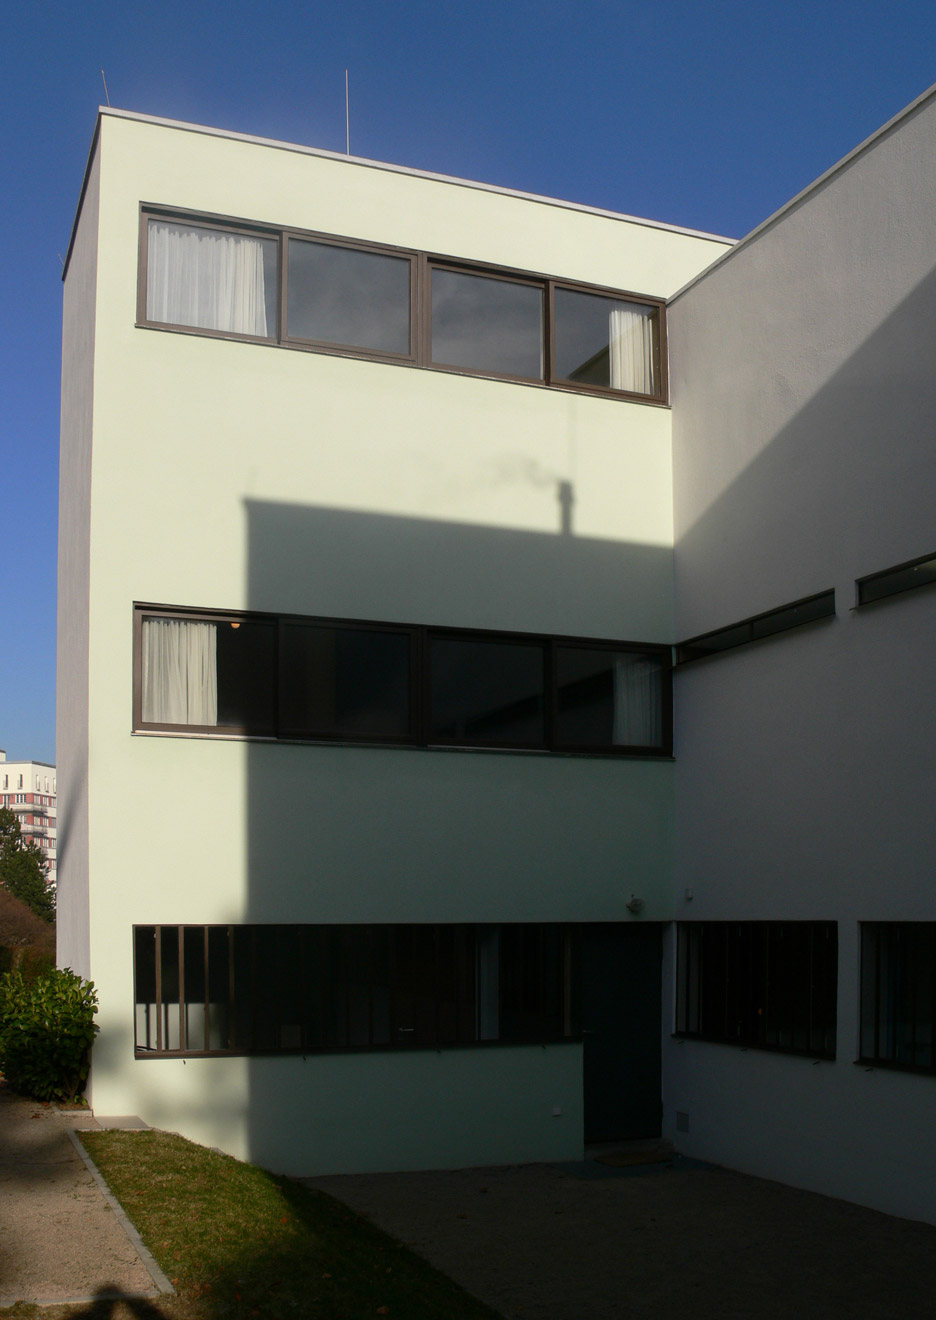 Le Corbusier and Pierre Jeanneret's contribution to the 1927 Weissenhof Siedlung